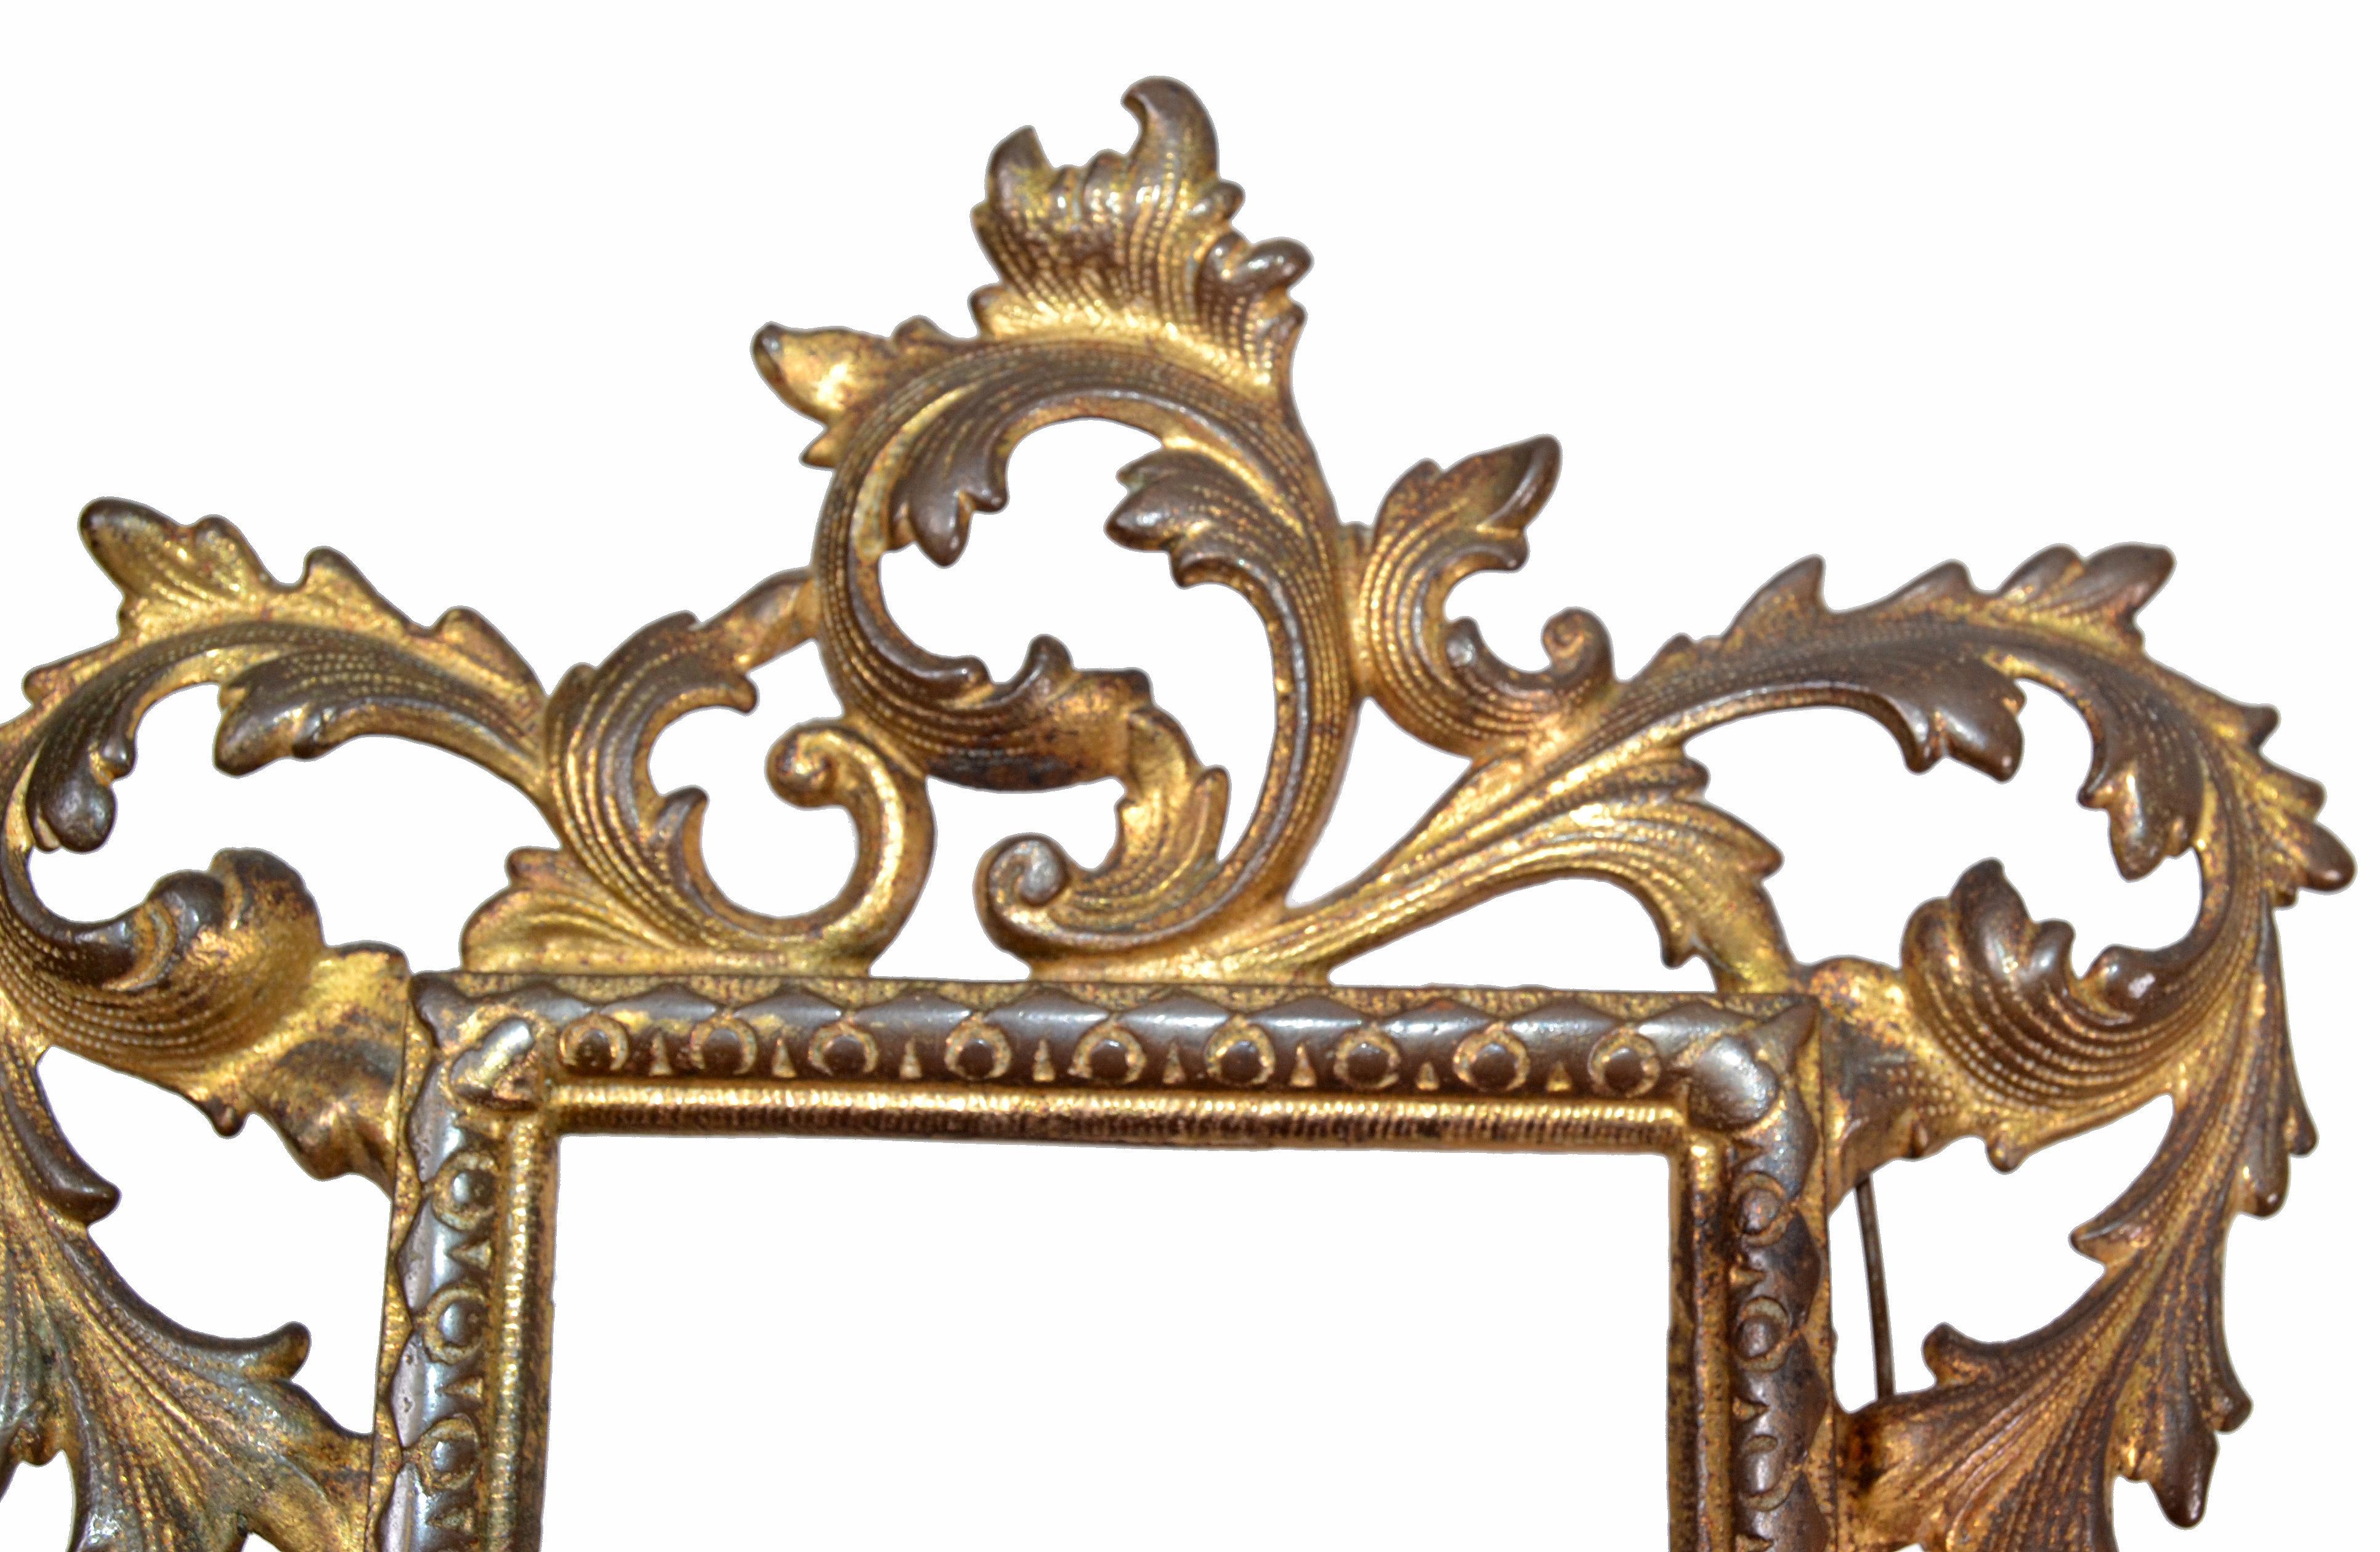 Gilt Art Nouveau Whimsical Handcrafted Golden Wrought Iron Picture Frame